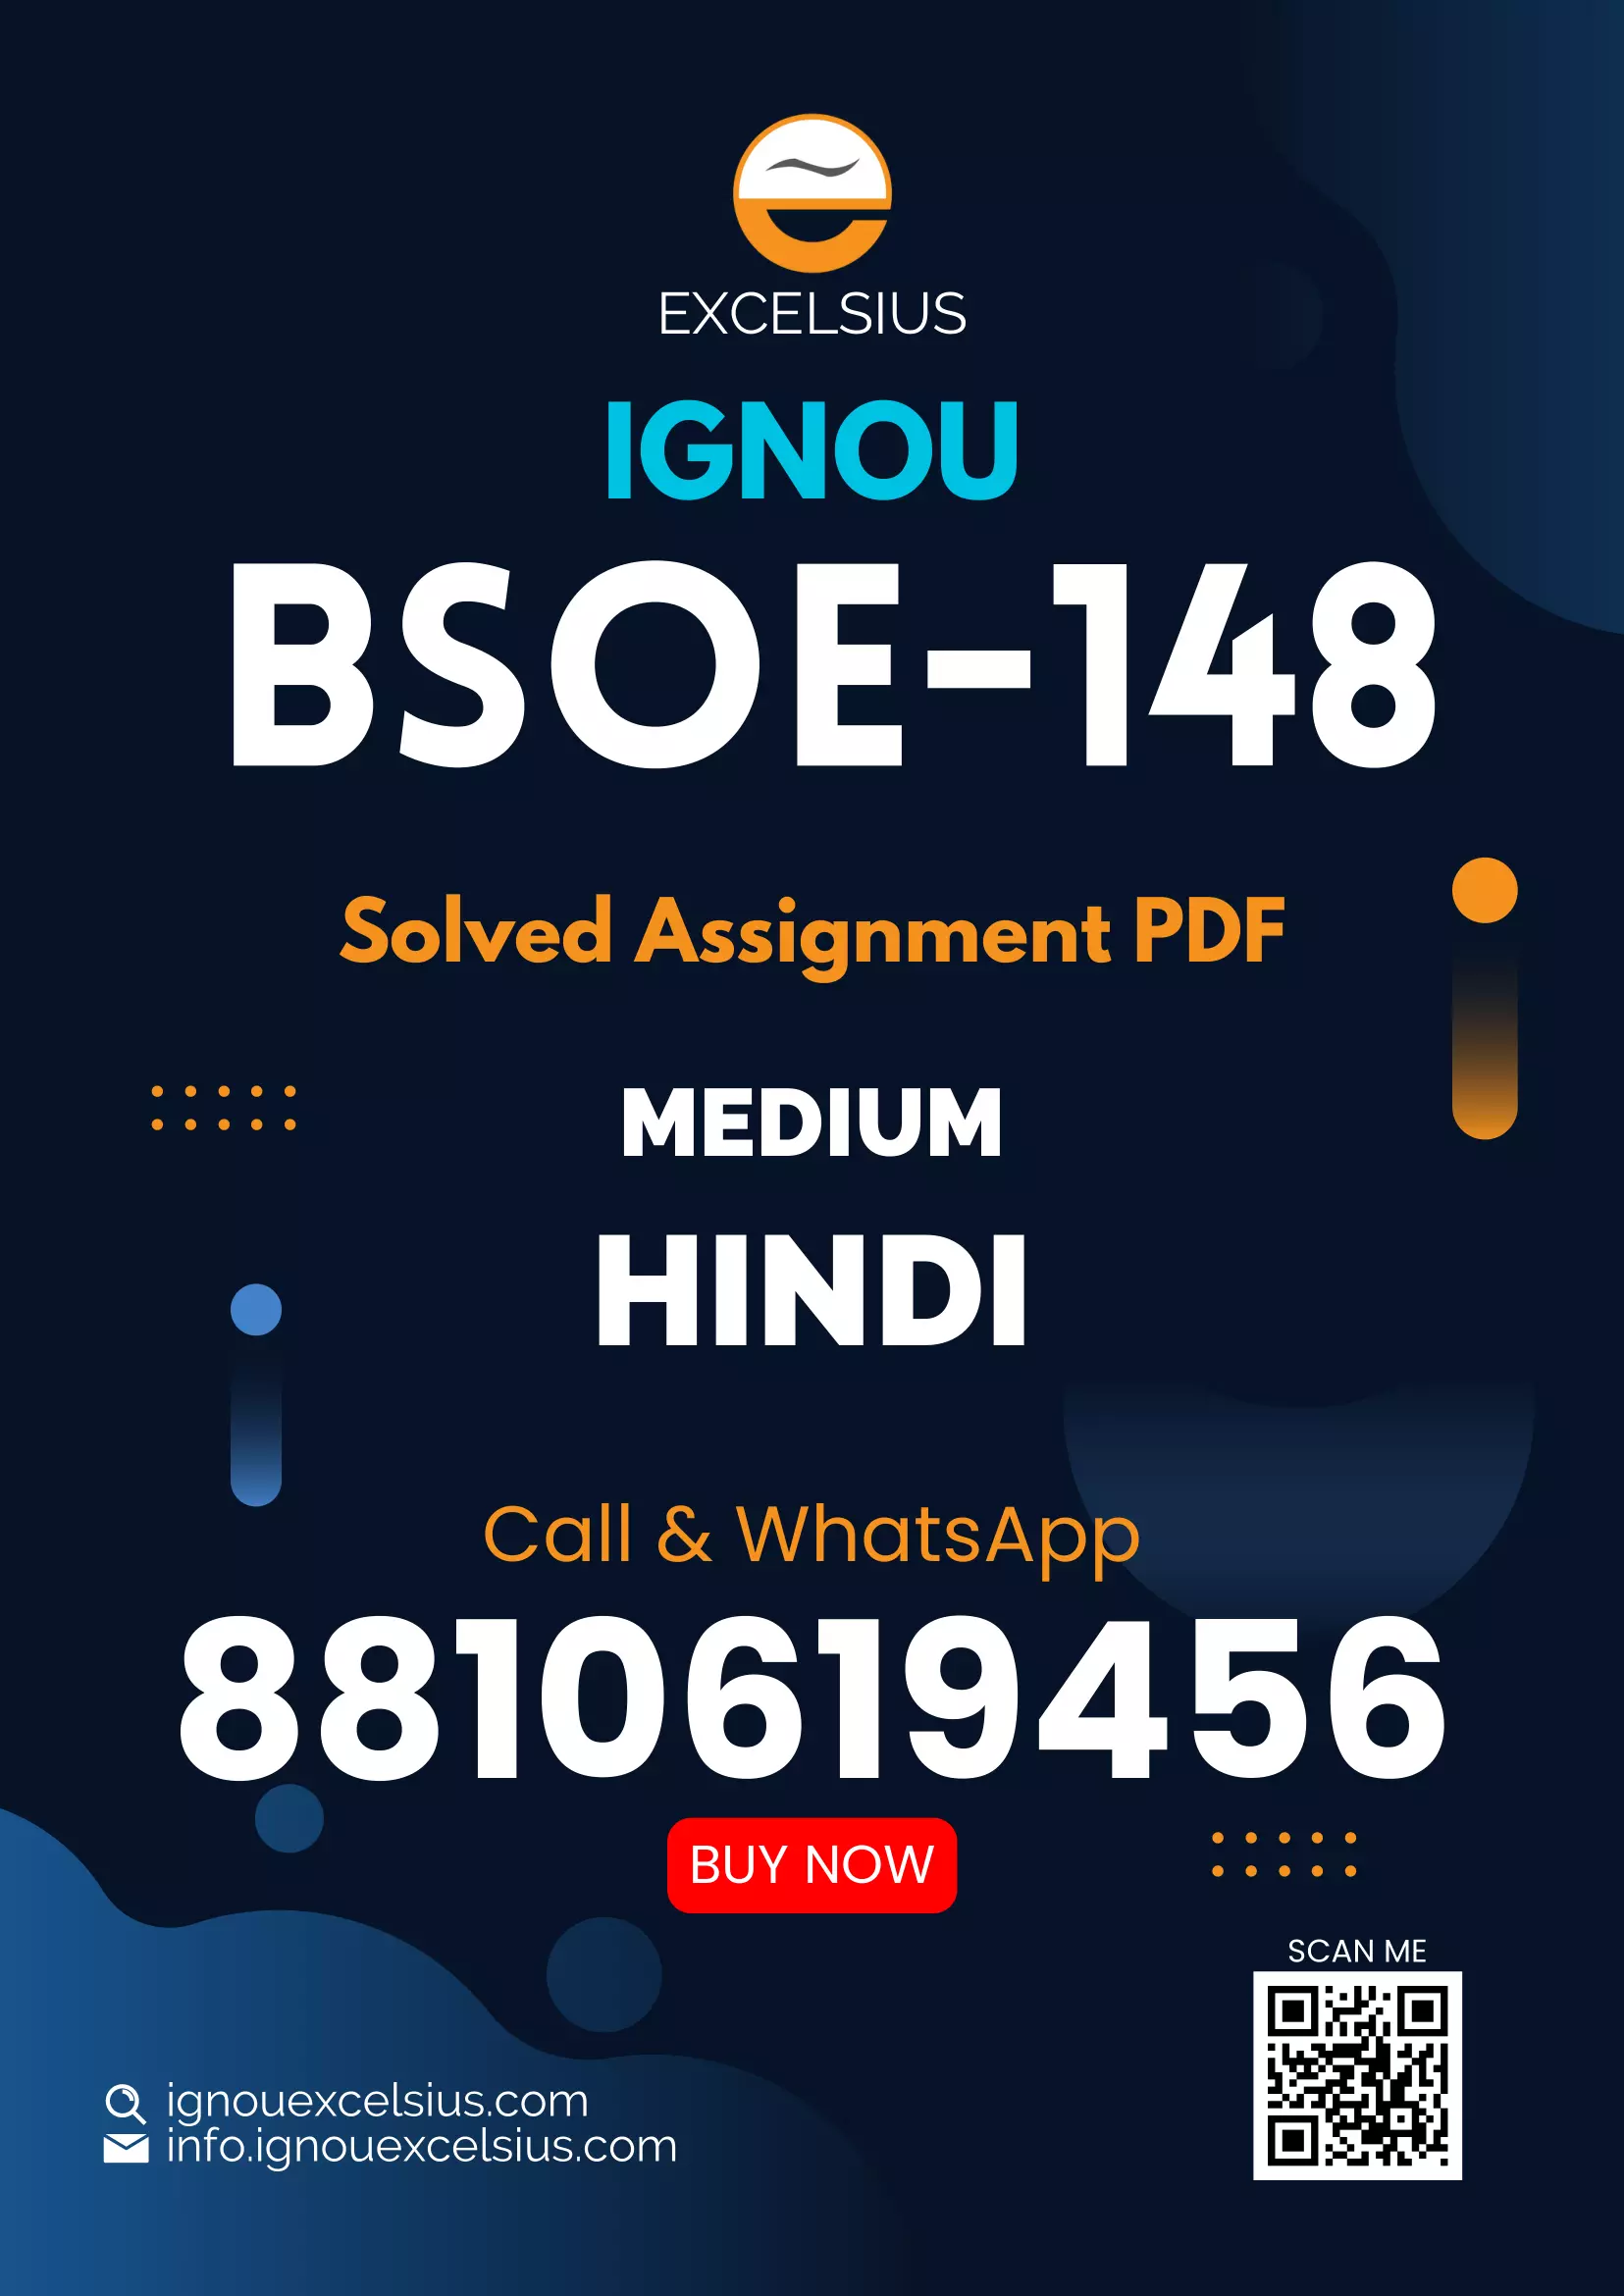 IGNOU BSOE-148 - Social Stratification, Latest Solved Assignment-July 2023 - January 2024